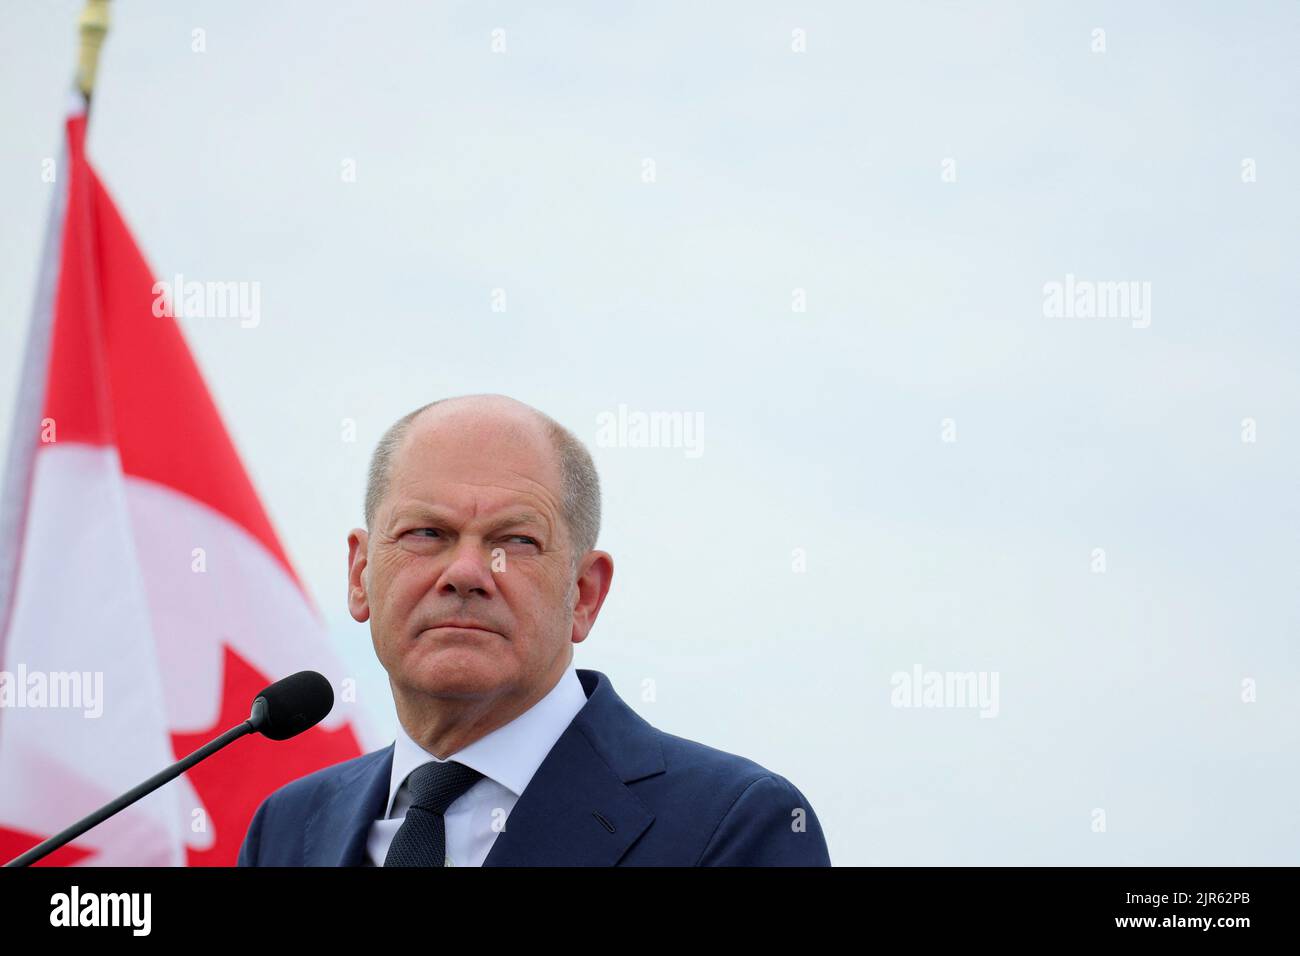 Germany's Chancellor Olaf Scholz looks on as he and Canada's Prime Minister Justin Trudeau speak to the media outside the Montreal Science Centre, in Montreal, Quebec, Canada August 22, 2022. REUTERS/Christinne Muschi Stock Photo